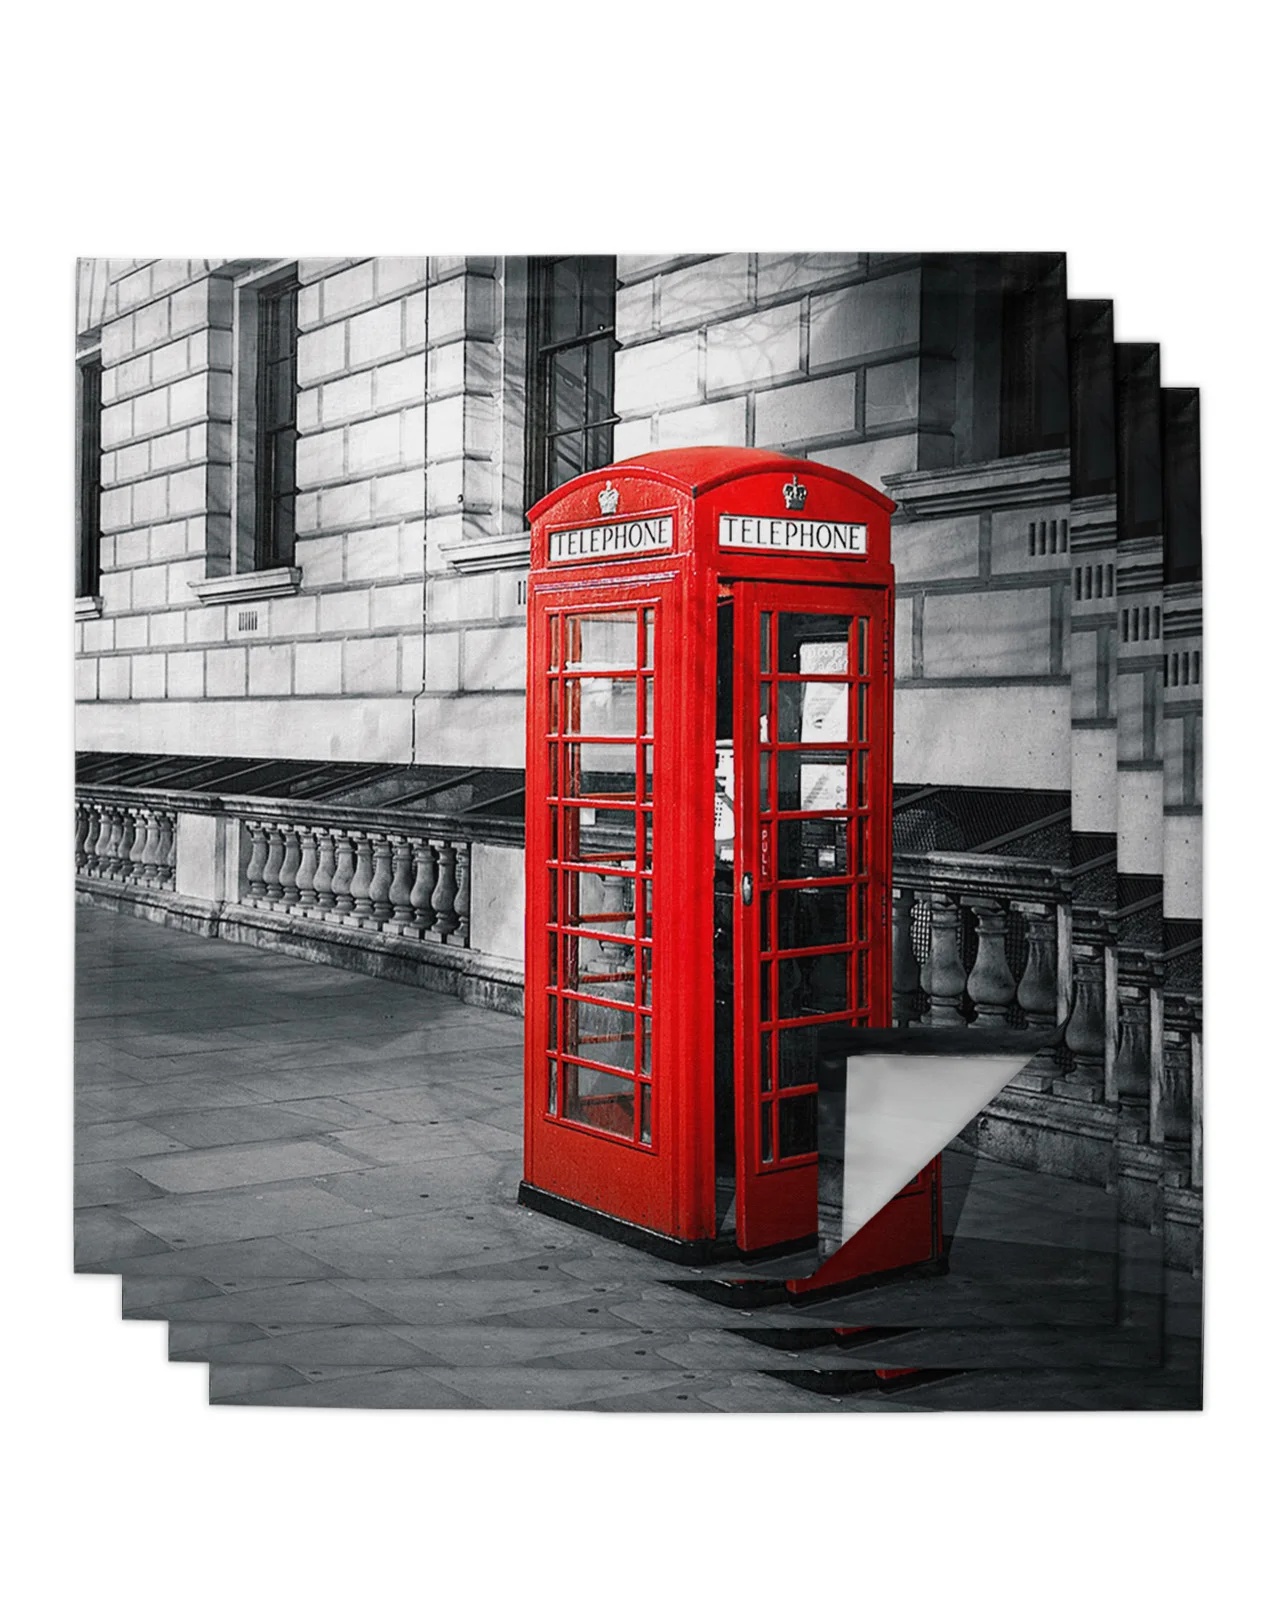 

4pcs Red Telephone Booth London Square 50cm Table Napkin Party Wedding Decoration Table Cloth Kitchen Dinner Serving Napkins